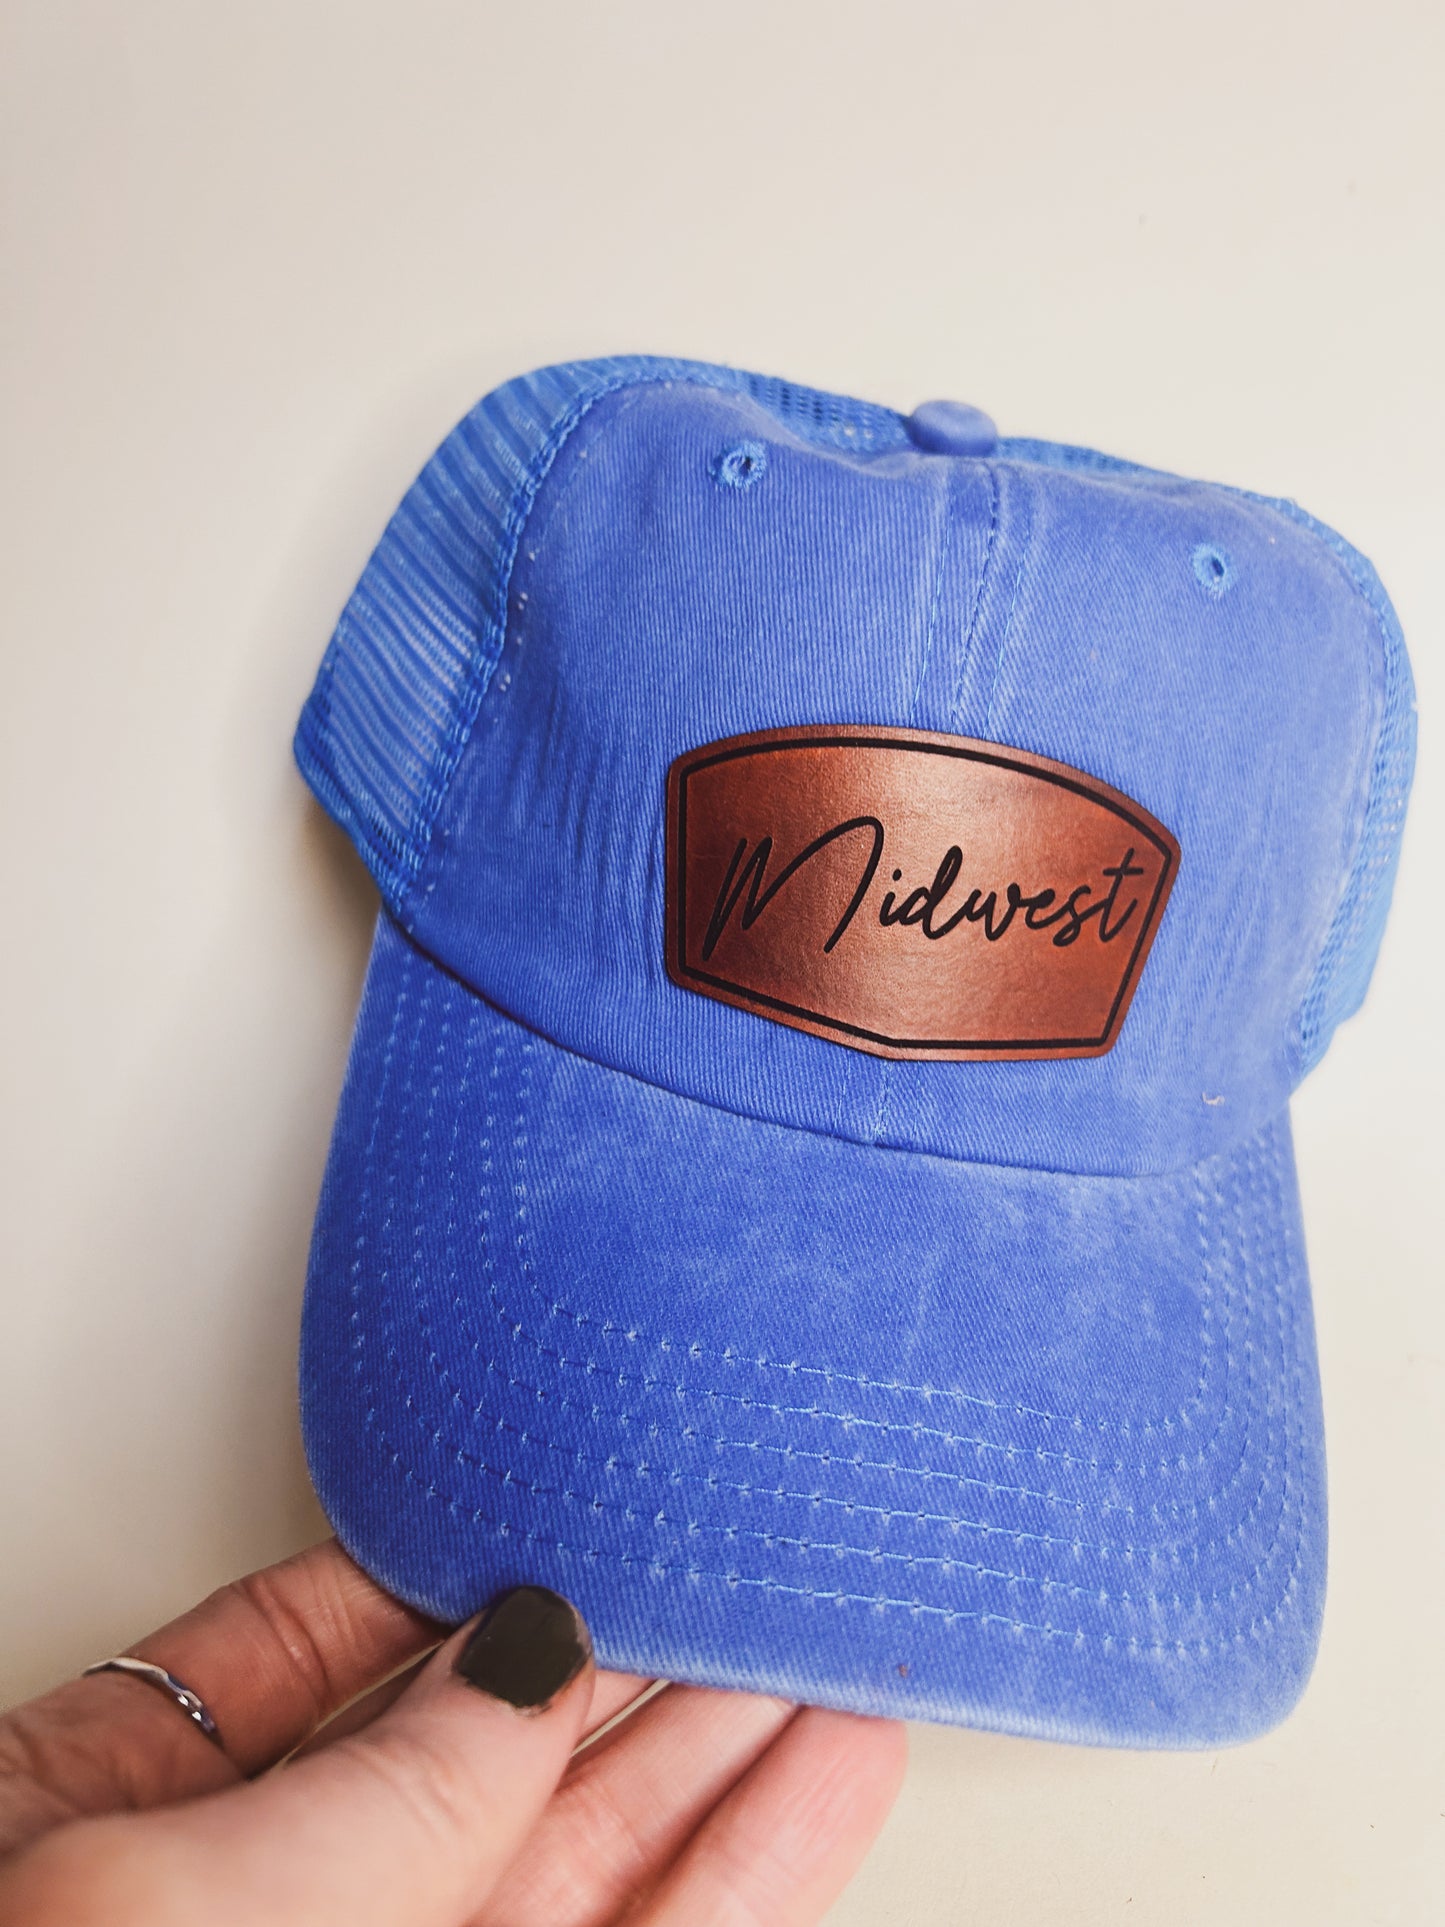 Midwest Patch on Blue Baseball Hat